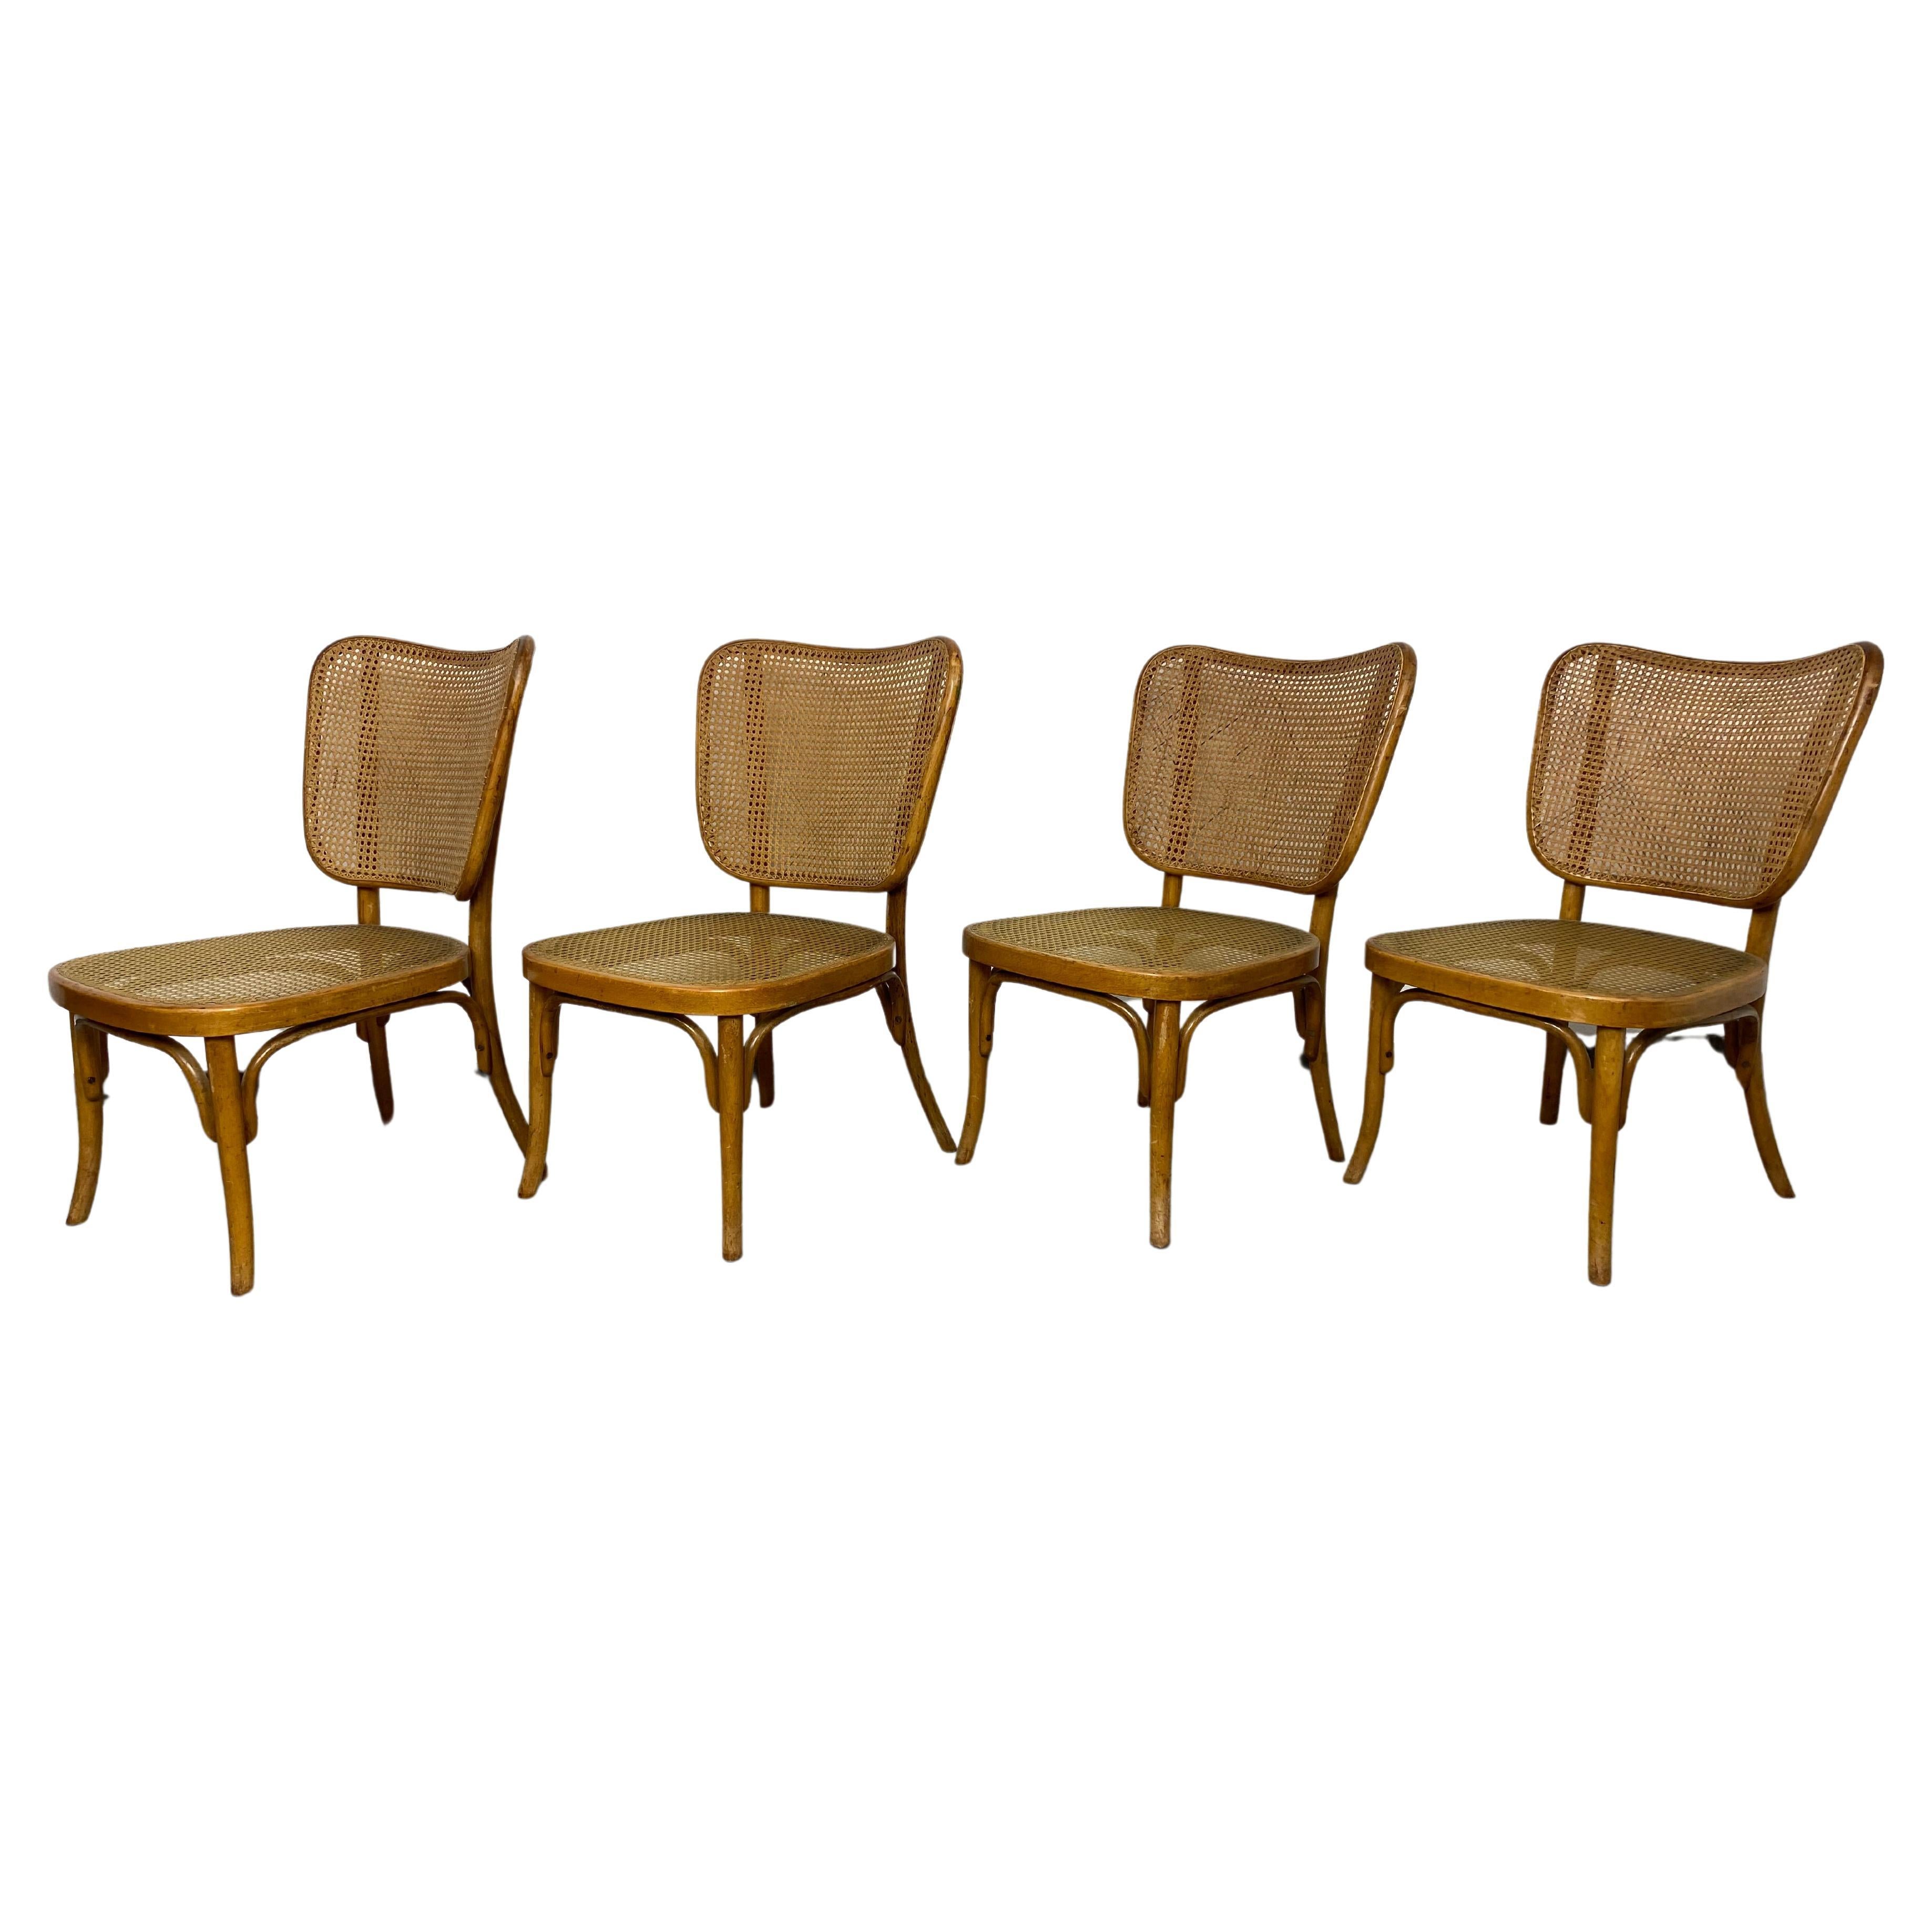 Set of 4 chairs model A821 by Adolf Gustav Schneck for Thonet Mundus